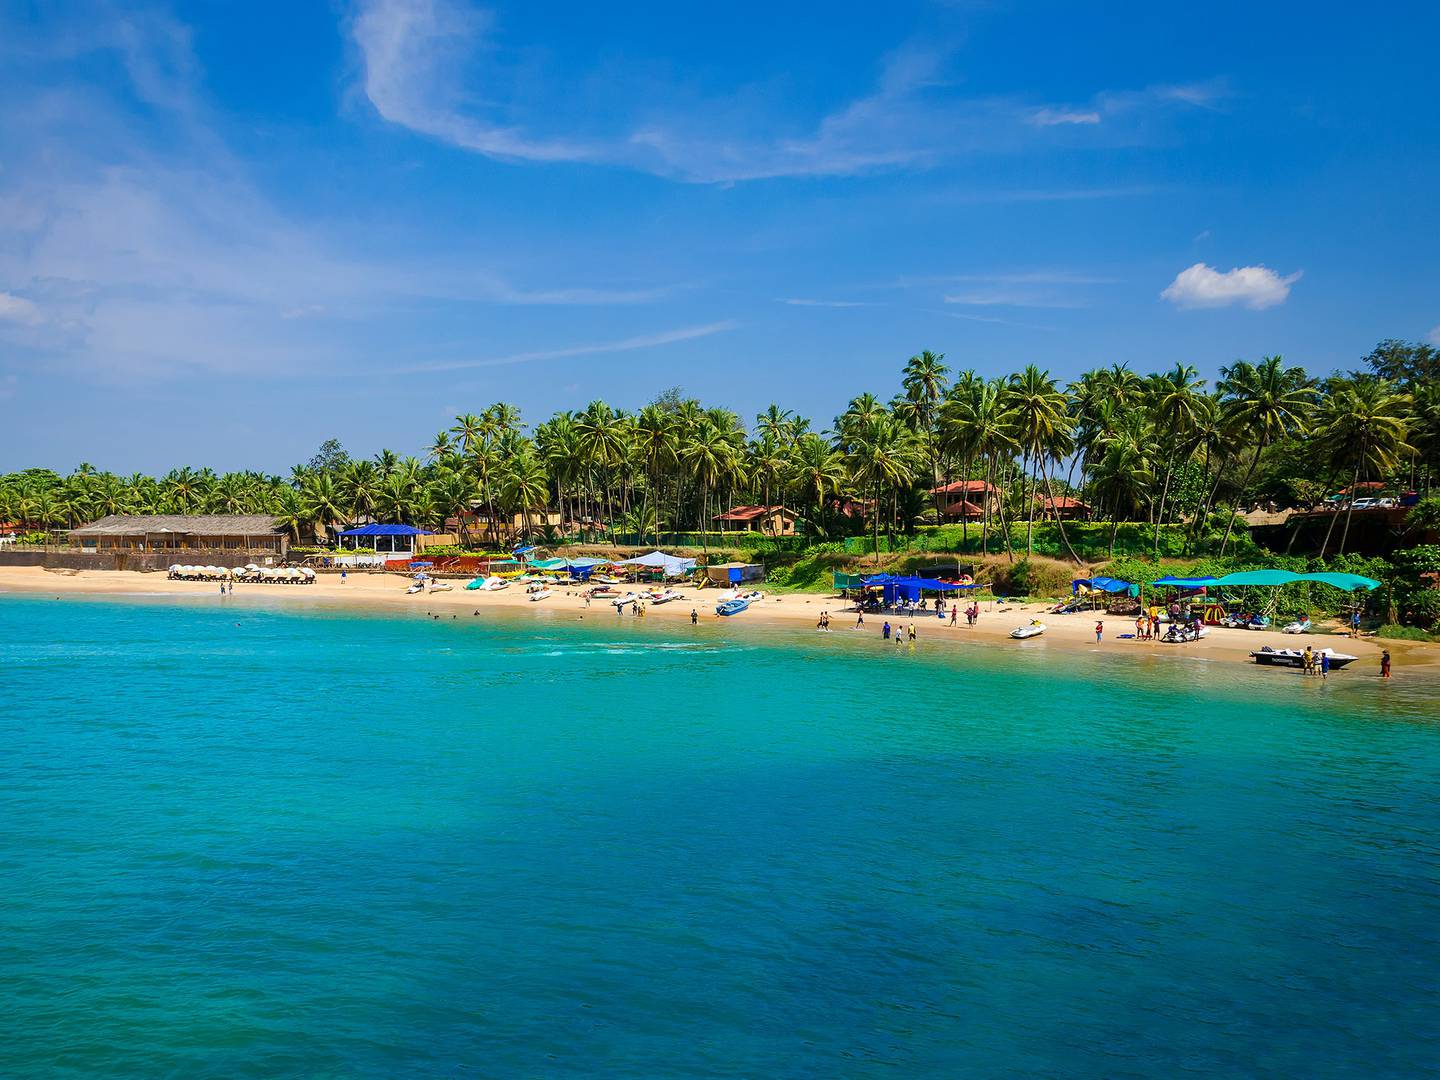 Guests can use the villa as a base from which to explore Goa's beaches. Photo: Unsplash